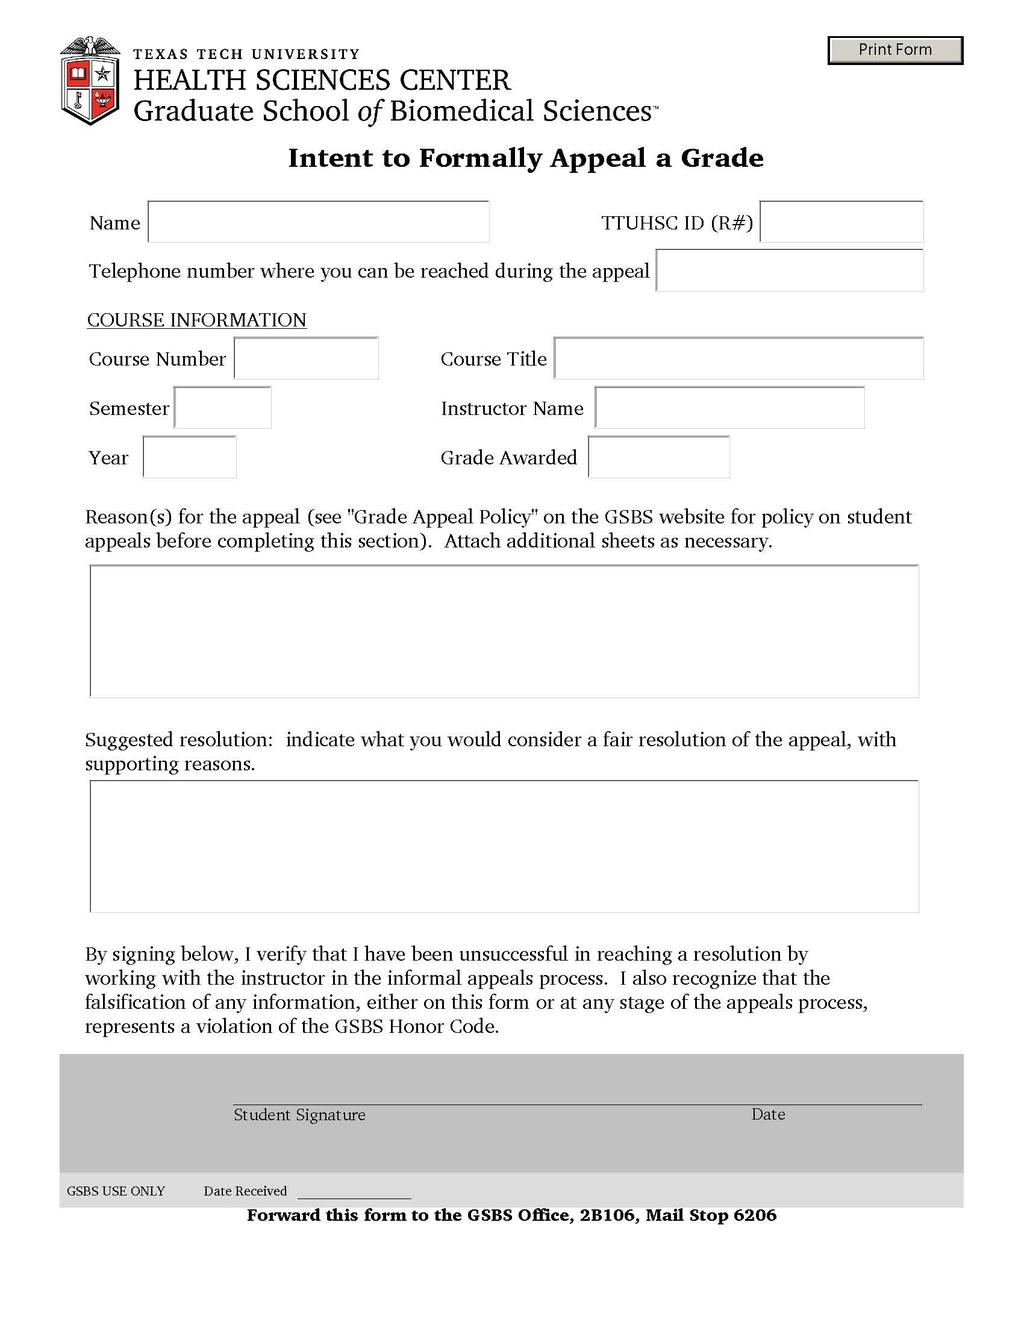 INTENT TO FORMALLY APPEAL A GRADE (MUST BE COMPLETED ON-LINE AT: http://www.ttuhsc.